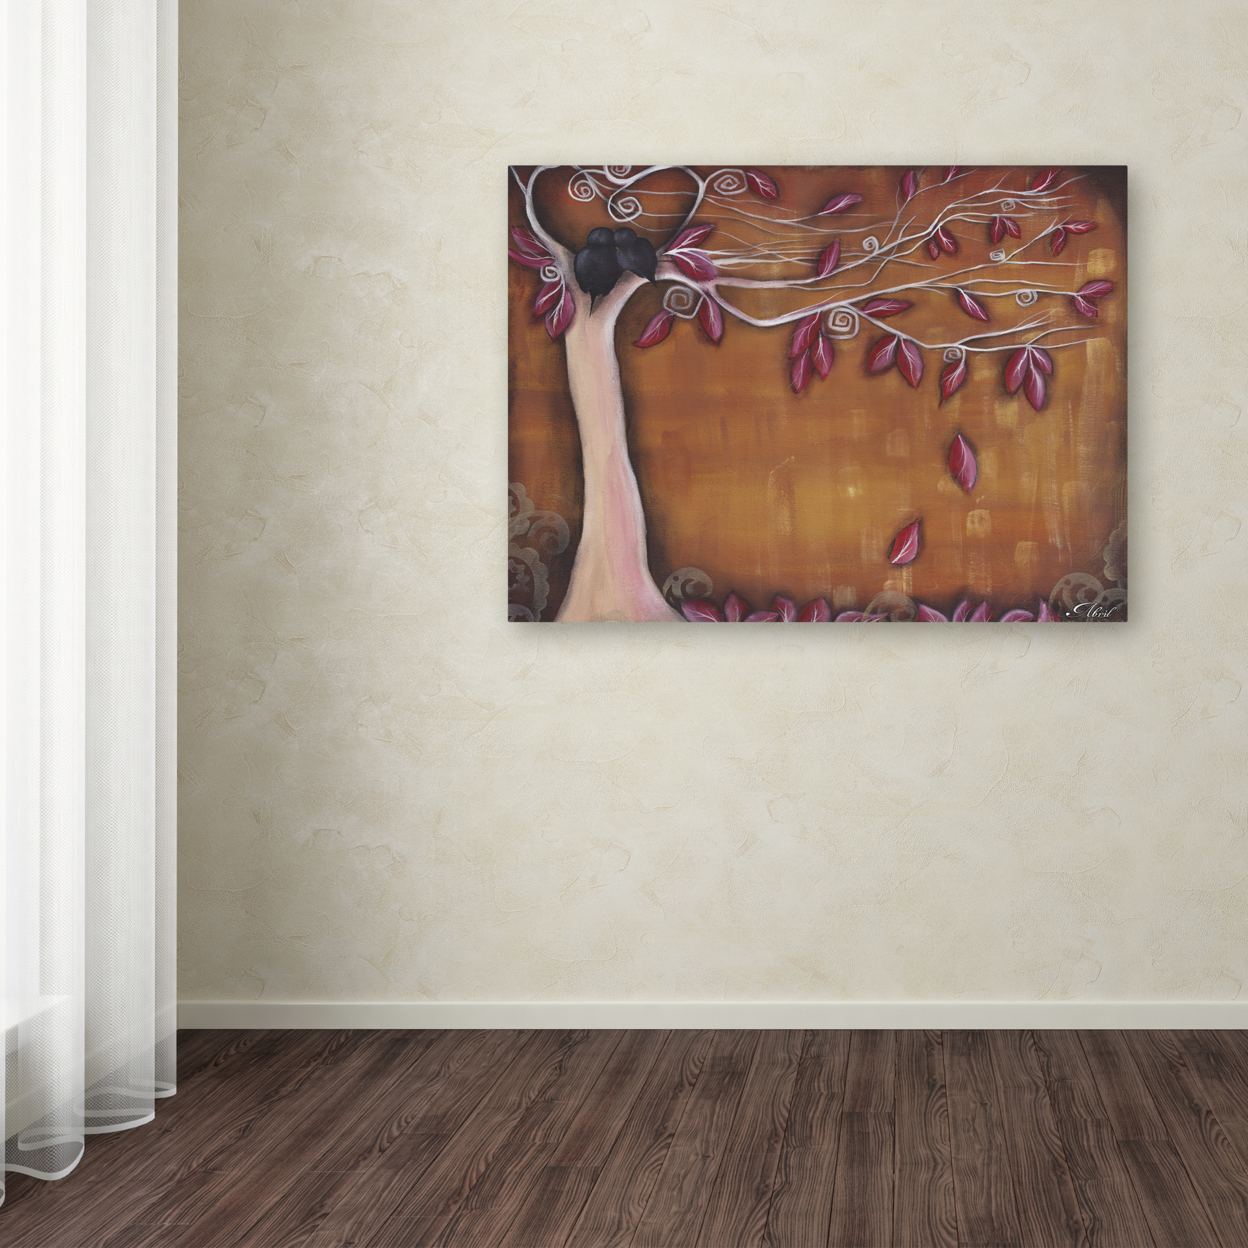 Abril Andrade 'By Your Side Forever' Canvas Wall Art 35 X 47 Inches